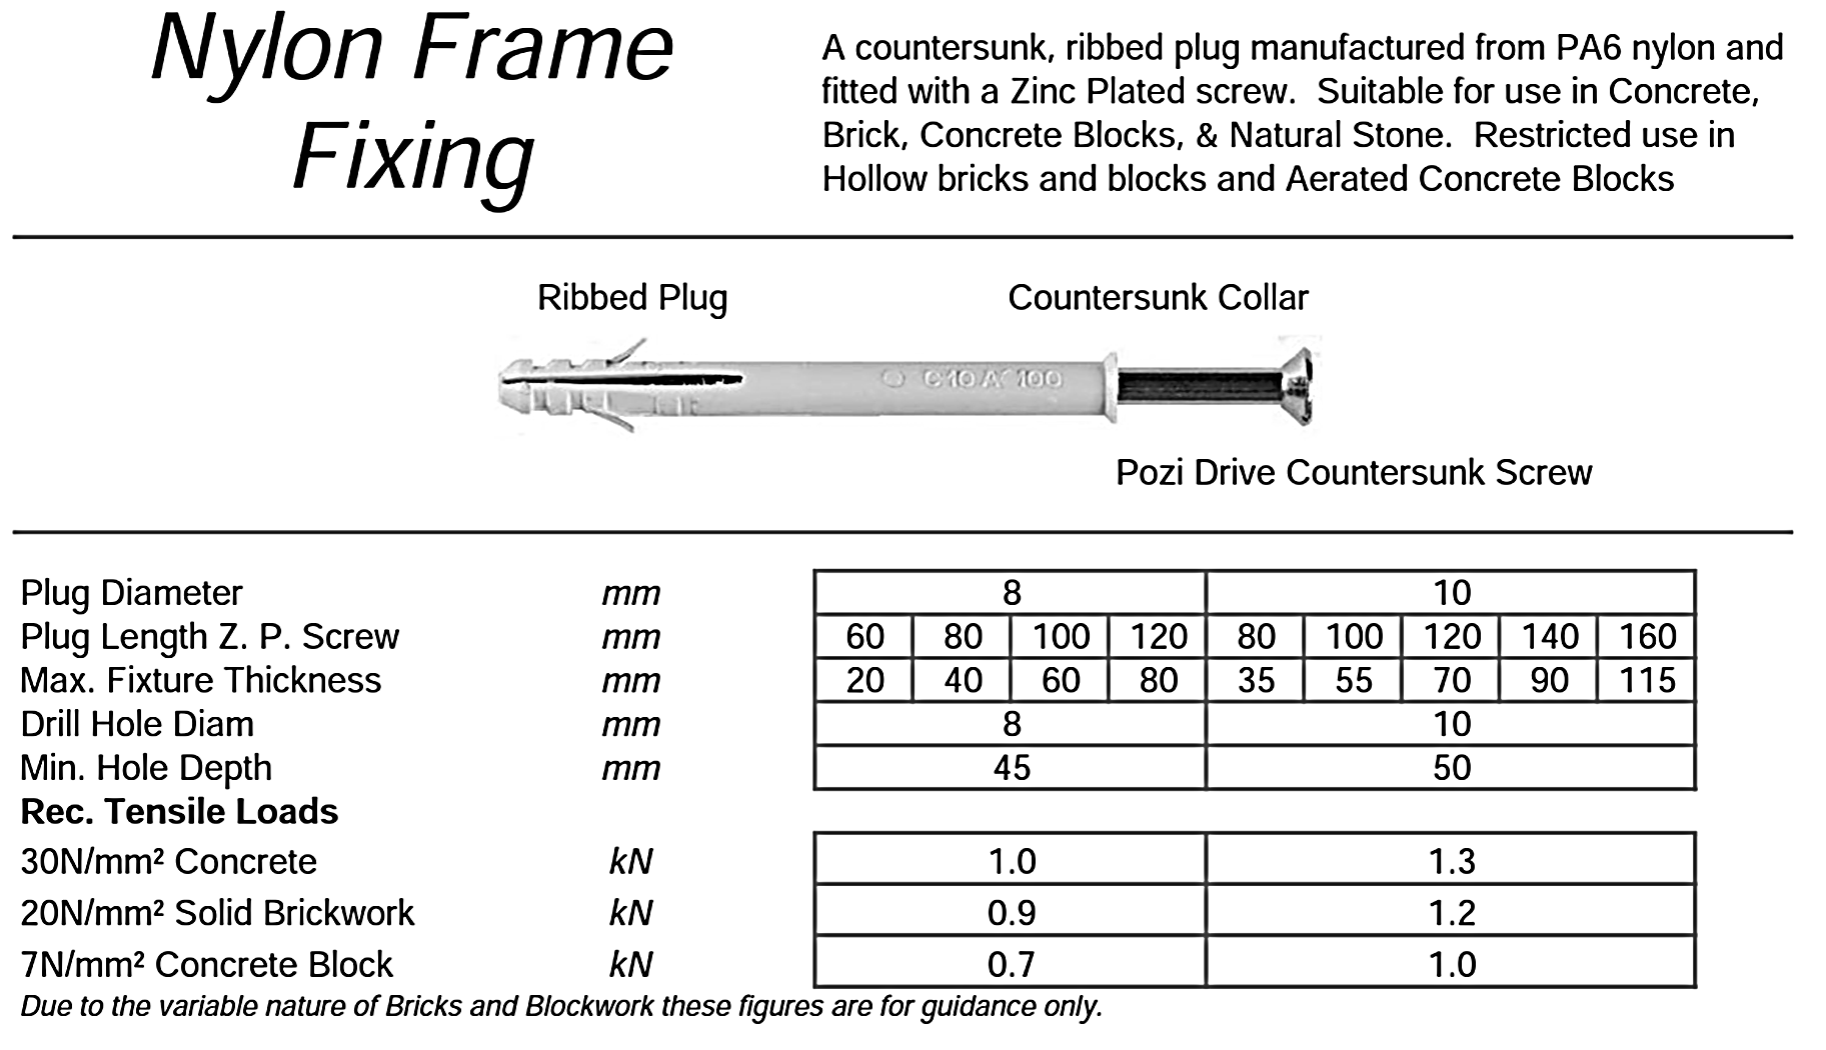 8mm, 10mm, Frame Fixing, Plug and Screw, Countersunk, Pozi, Zinc. Frame Fixing 8mm, 10mm, Frame Fixing, Plug and Screw, Countersunk, Pozi, Zinc. Nylon Frame Fixing